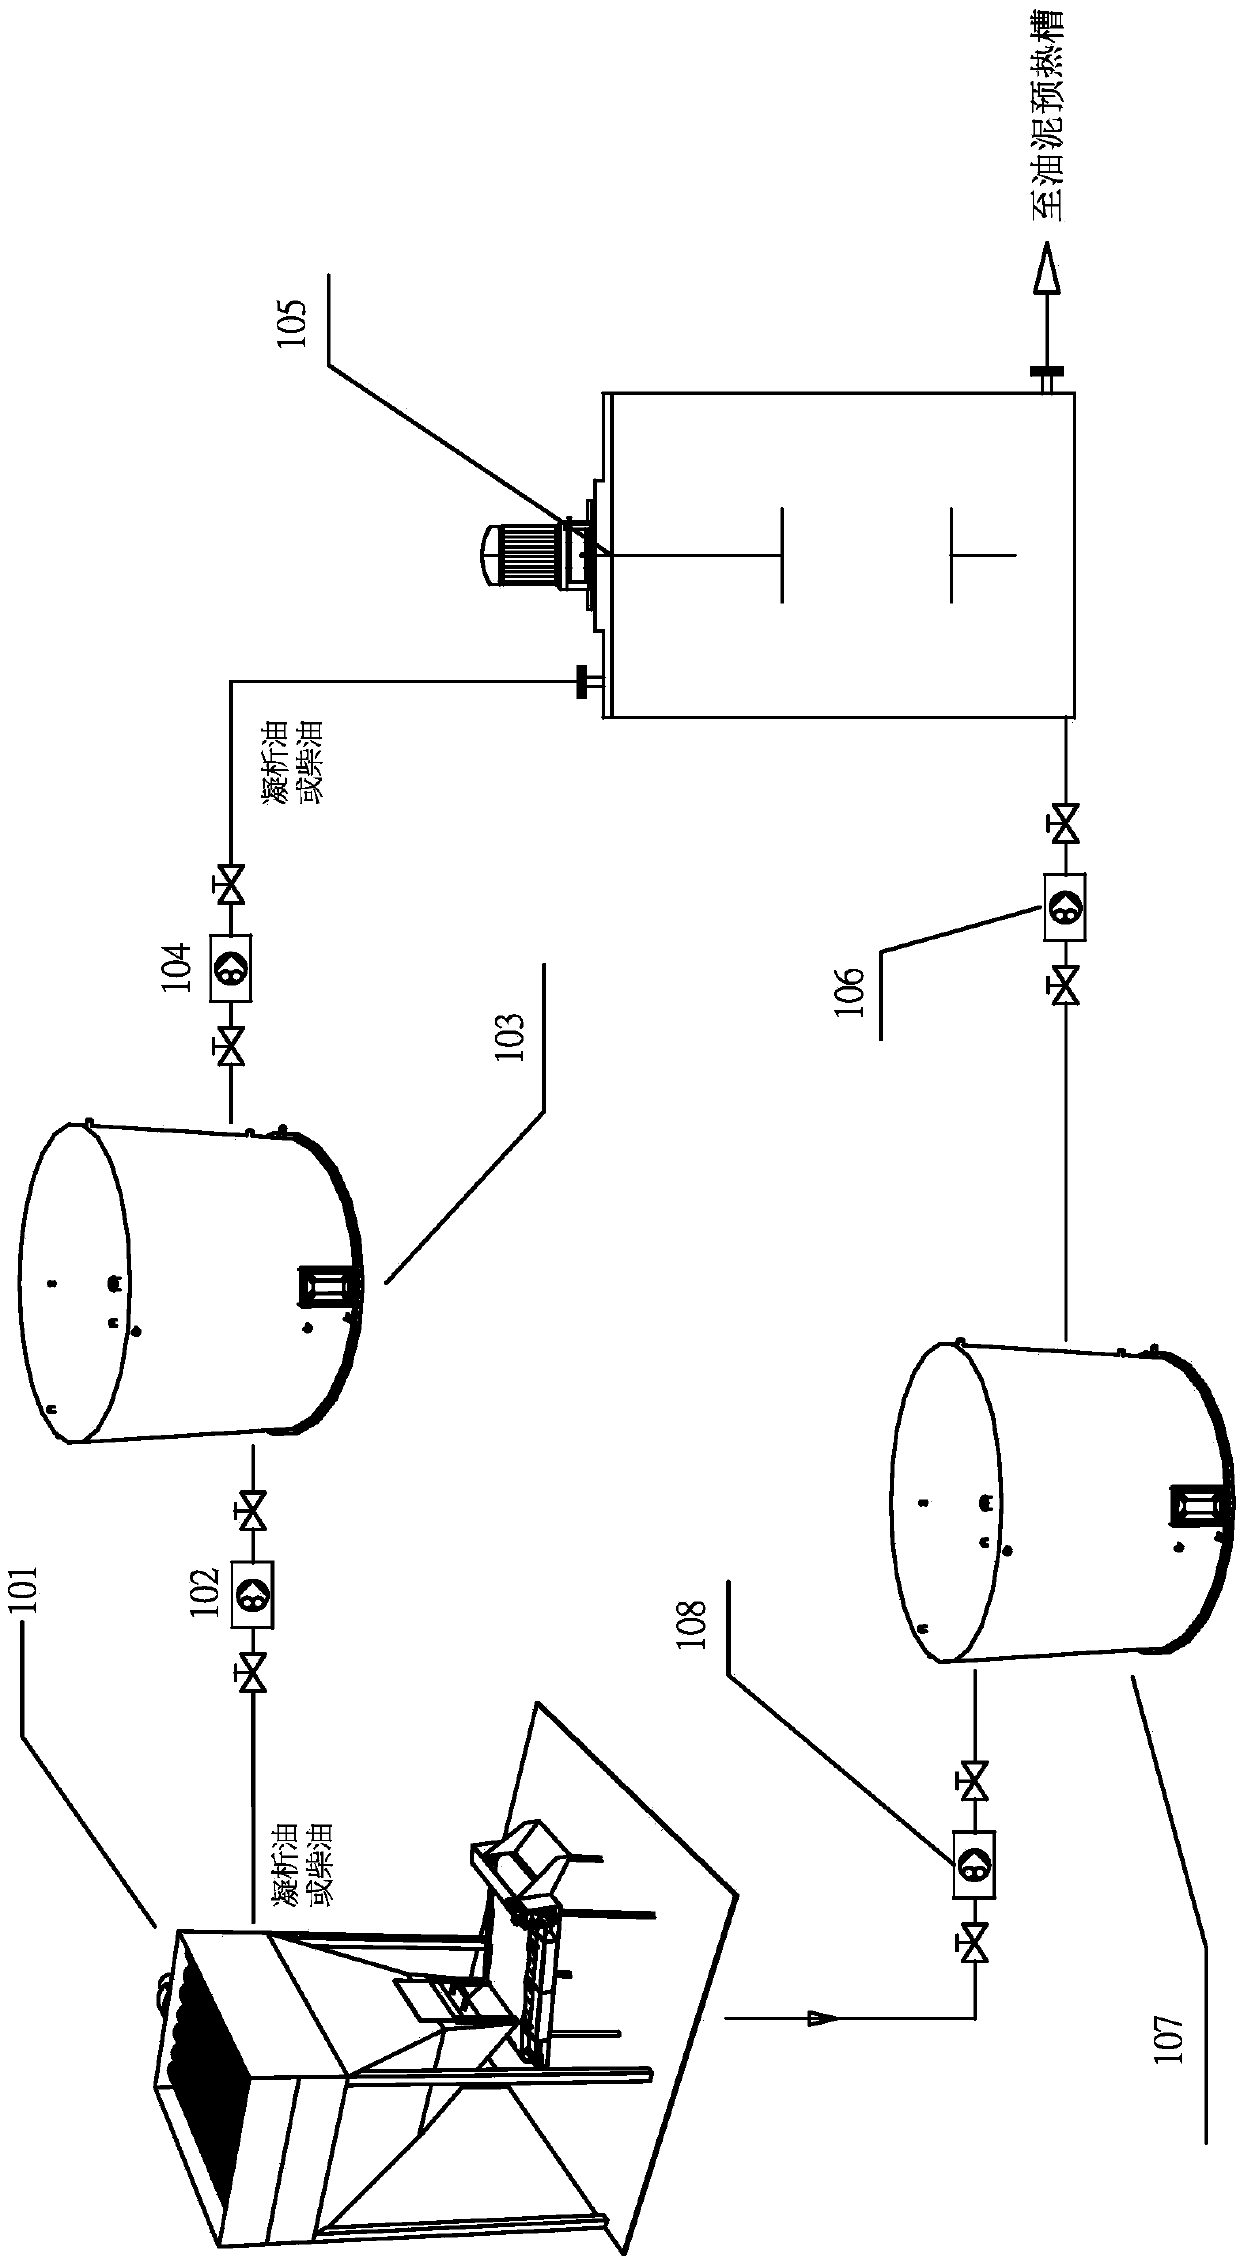 Method for treating drilling oil sludge mixed with oil-based drilling fluid